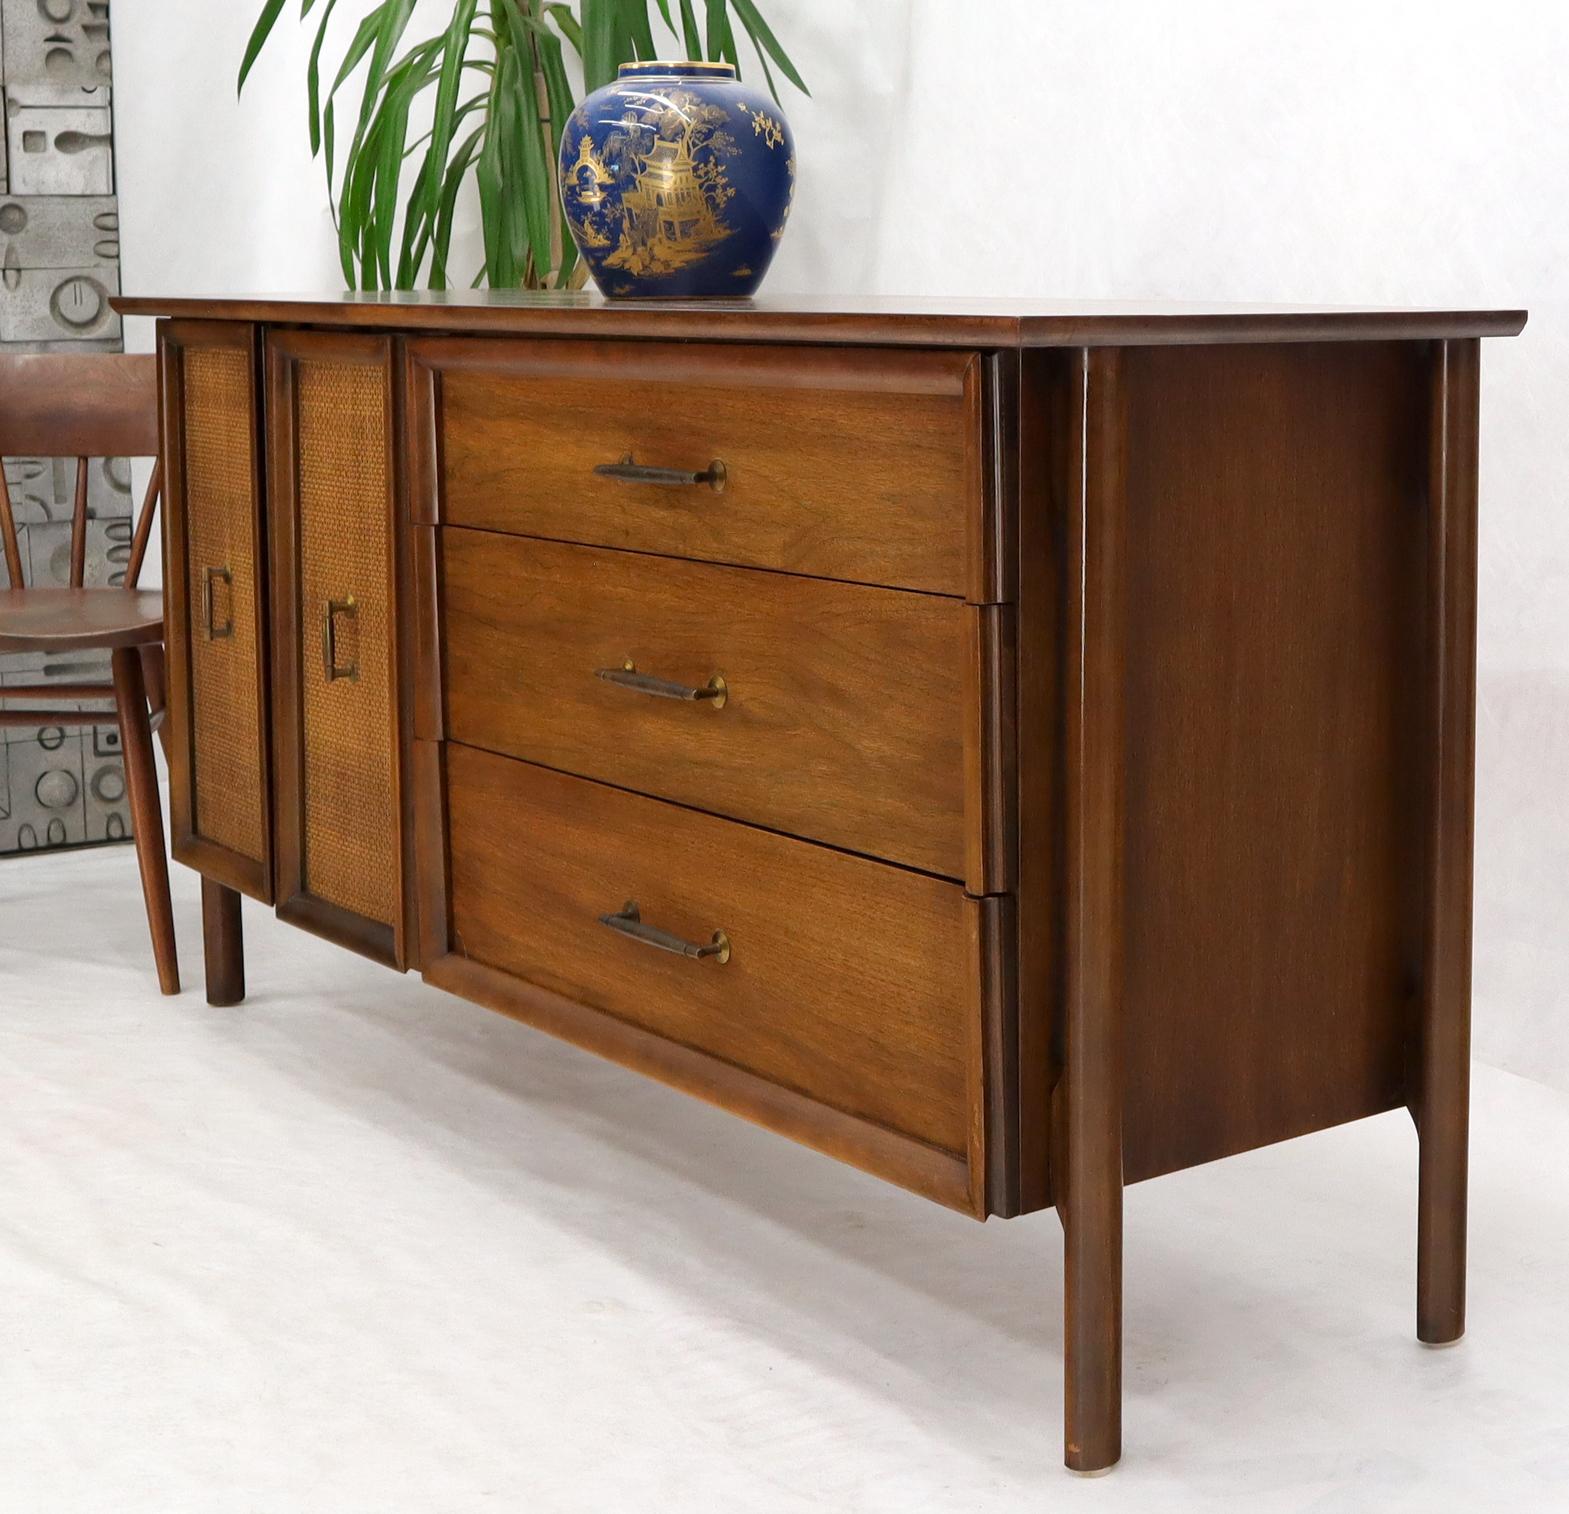 Lacquered Decorative Caned Door Front Exposed Legs Walnut Credenza Dreser For Sale